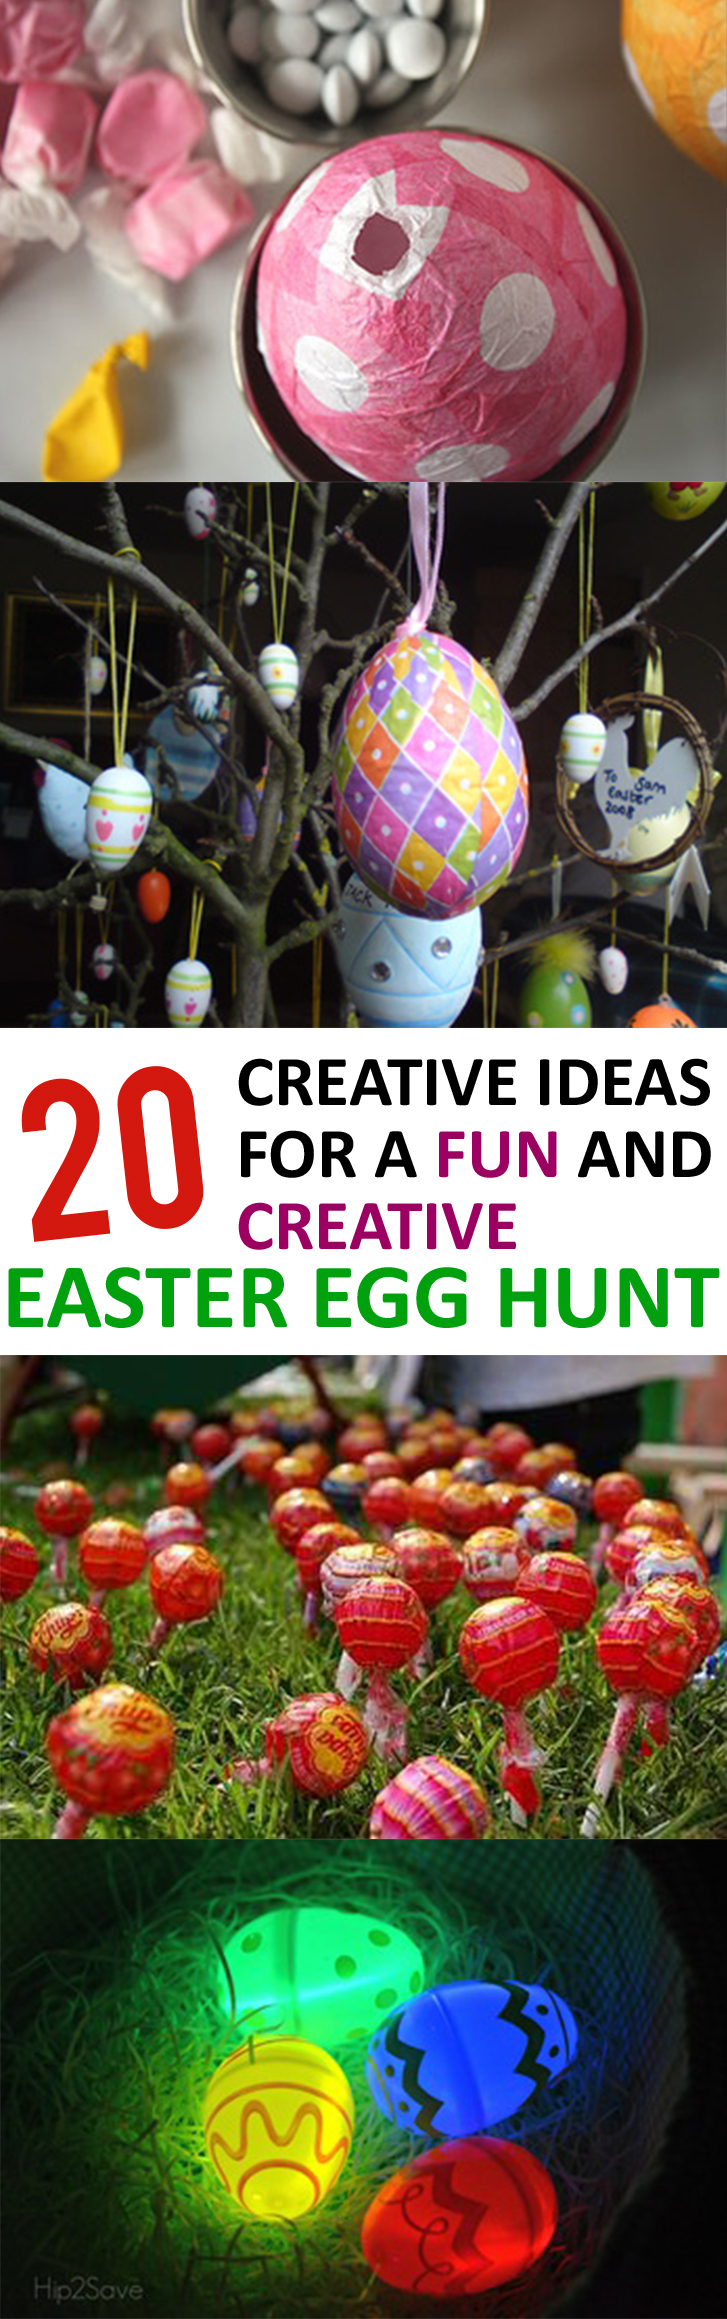 20 Creative Ideas for a Fun and Creative Easter Egg Hunt